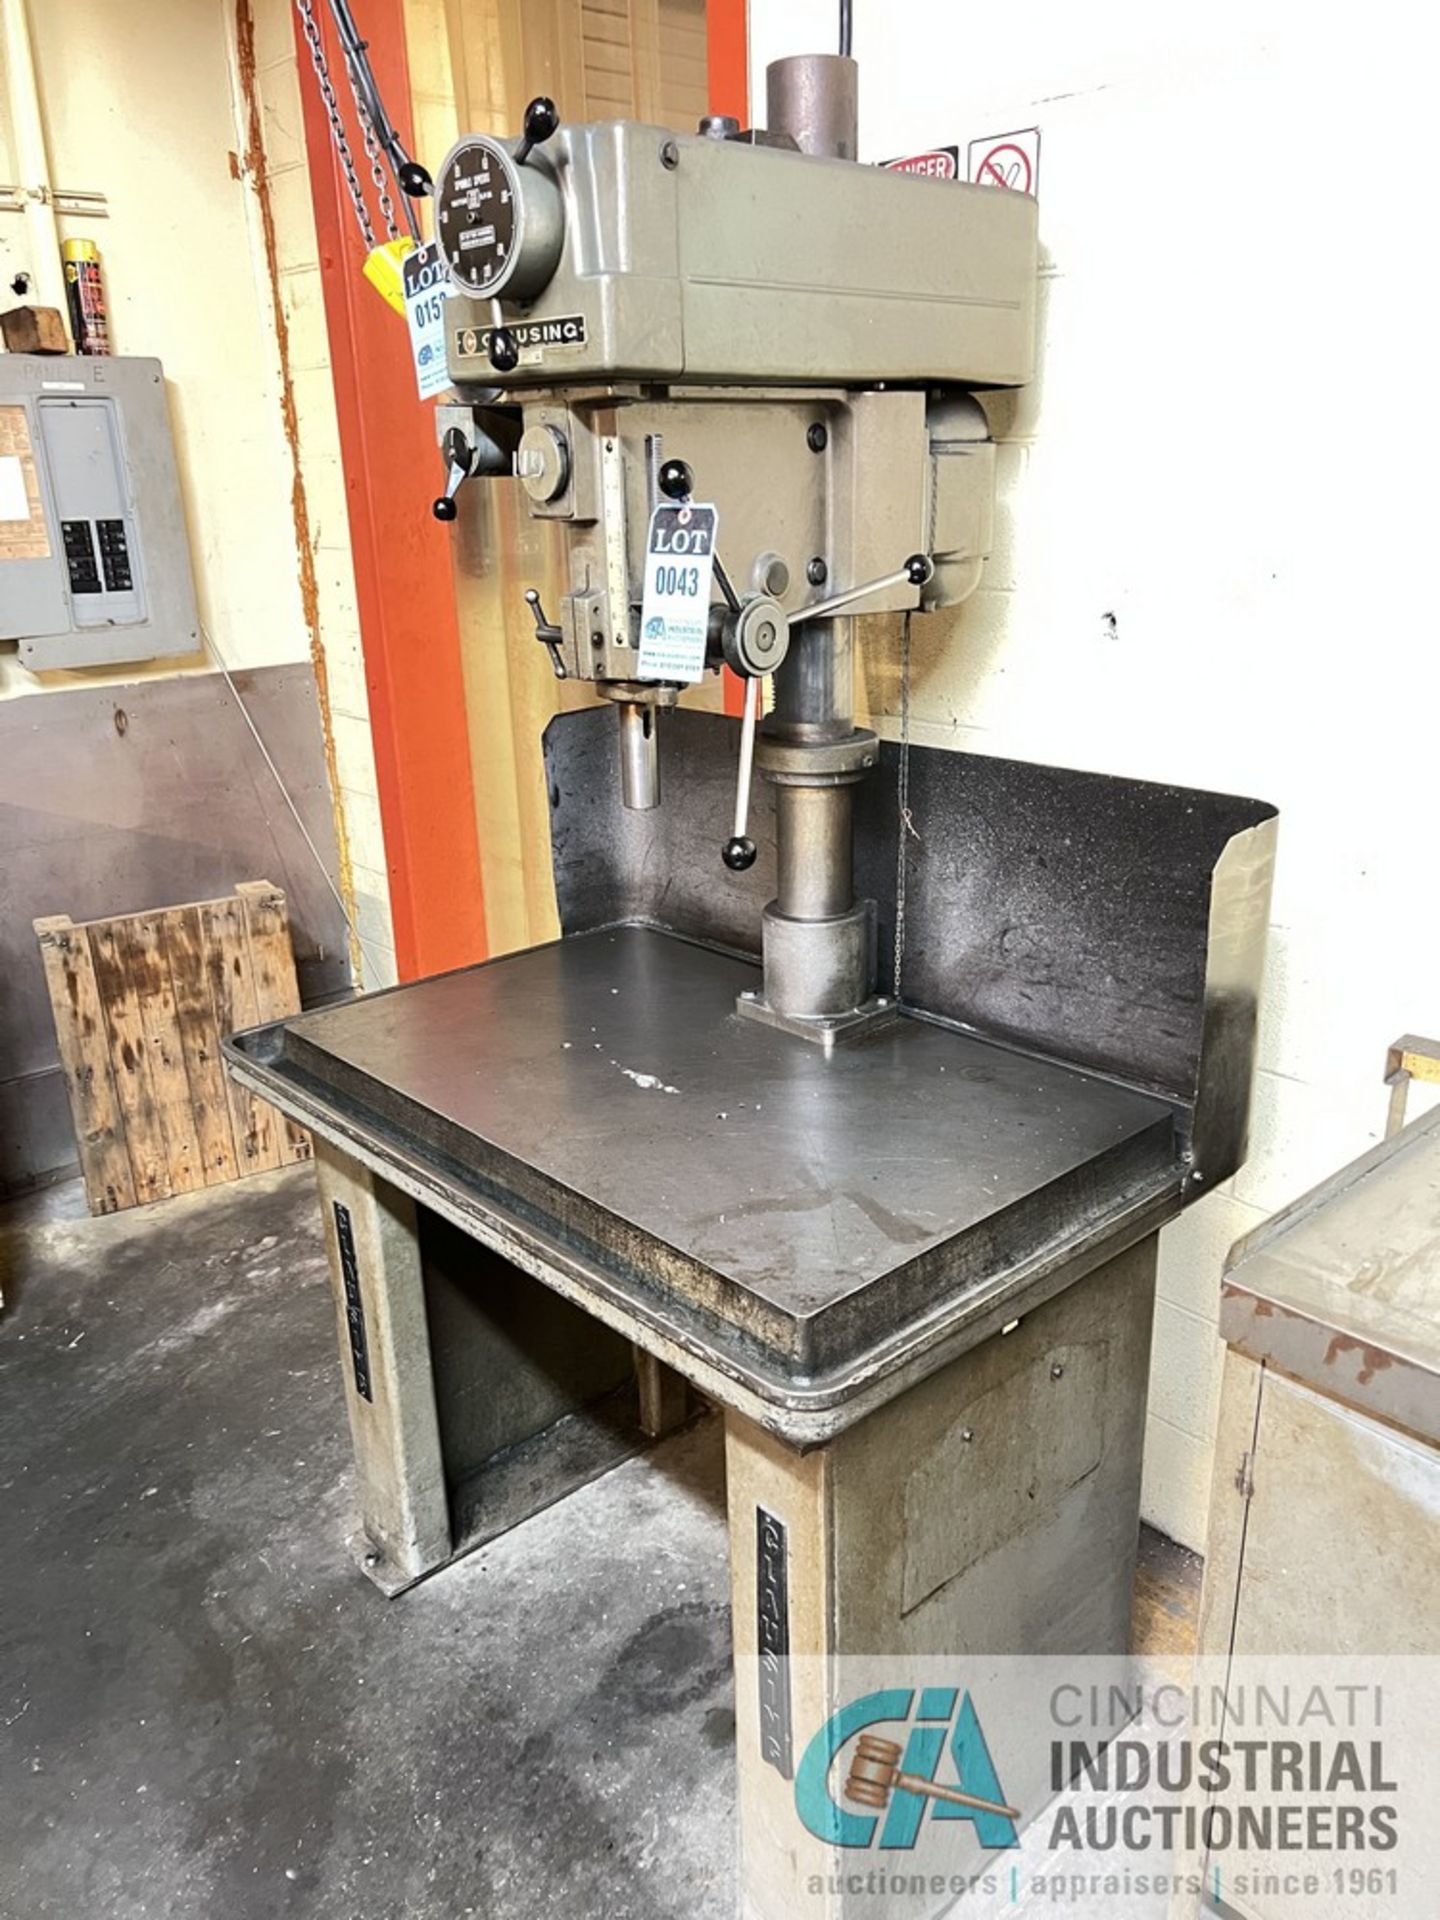 20" CLAUSING MODEL 2285 DRILL PRESS; S/N 514391, 40" X 22" TABLE, SPINDLE SPEEDS: 150-2,000 RPM **